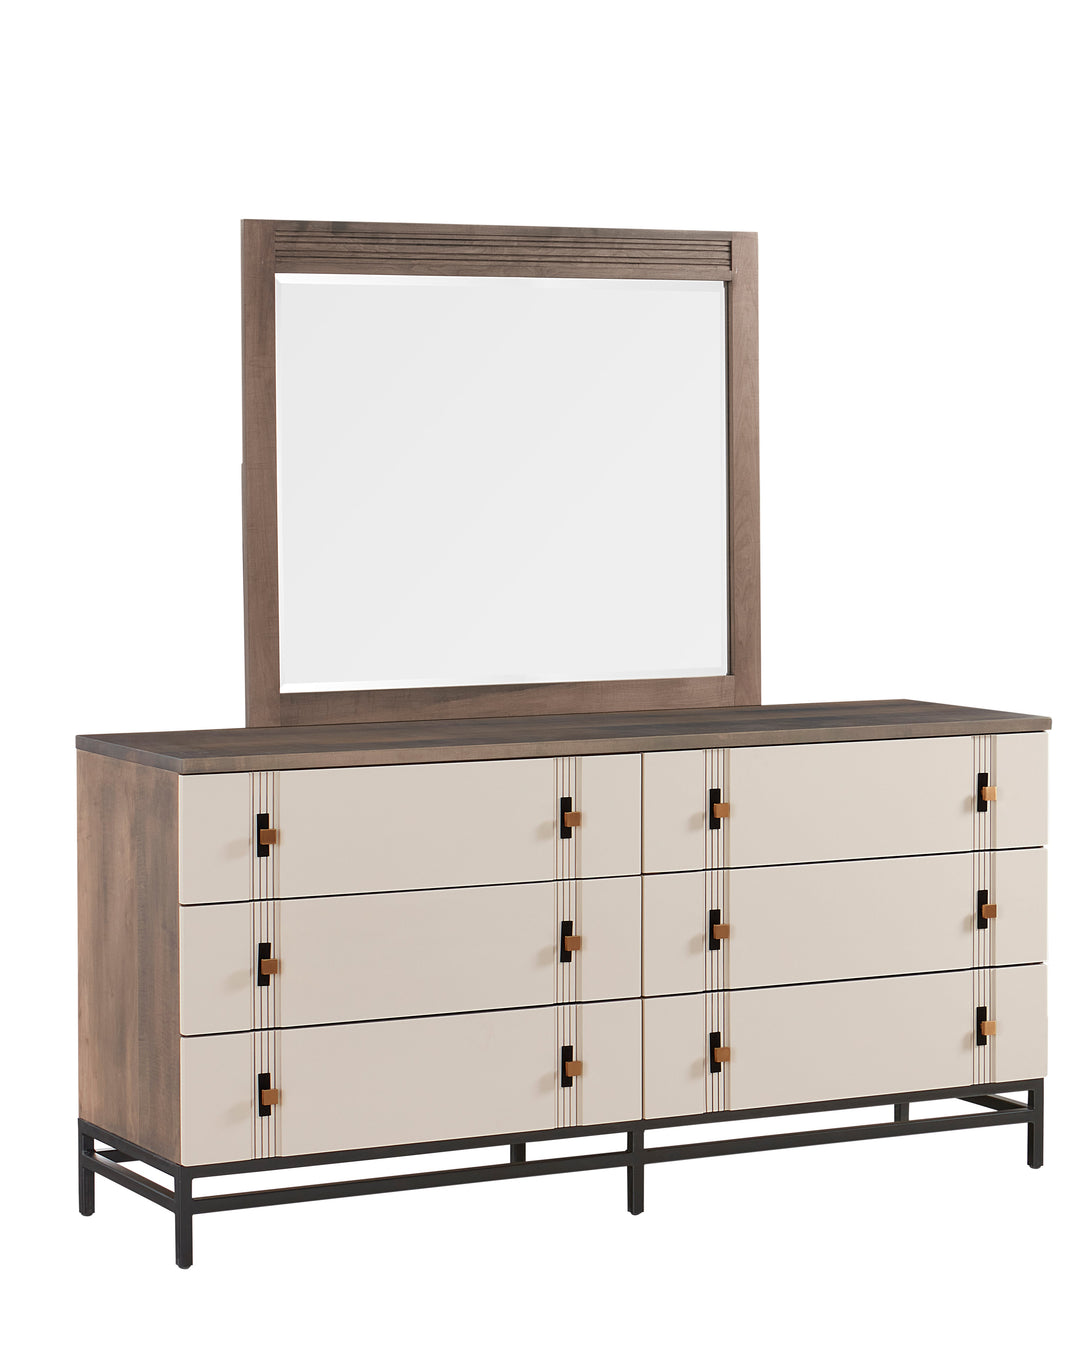 QW Amish Abshire 6 Drawer Dresser with Optional Mirror